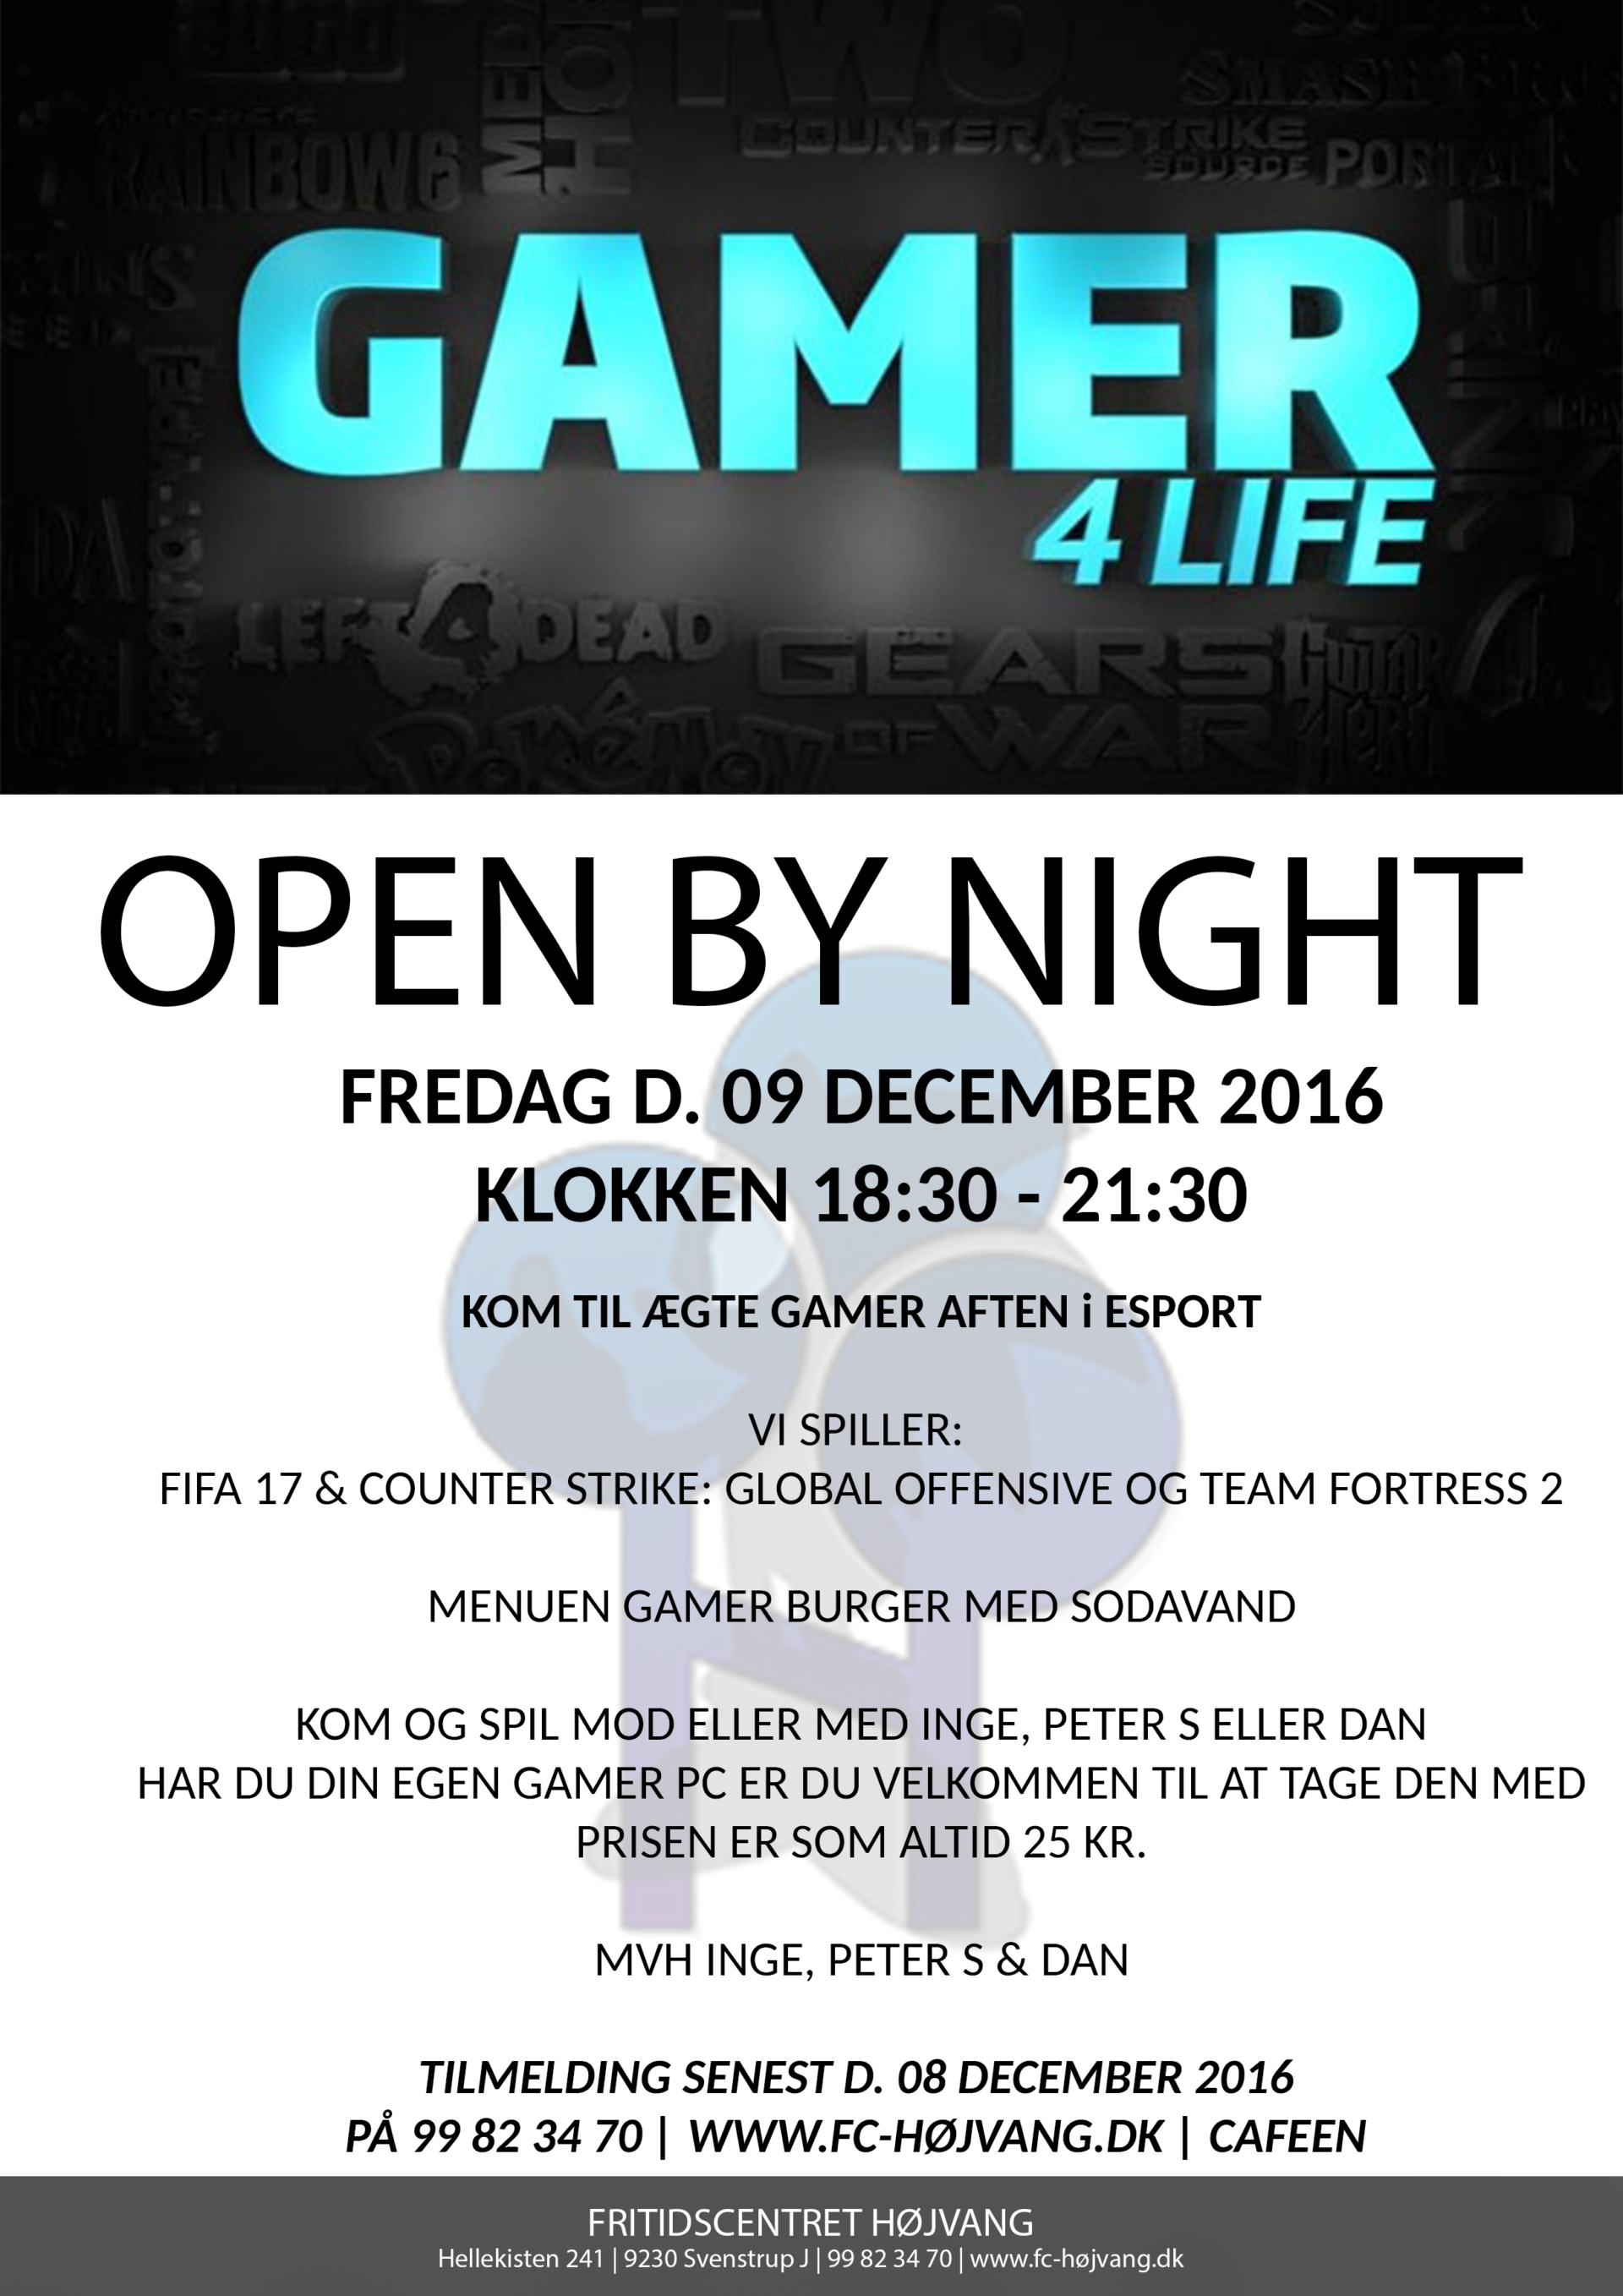 a4-open-by-night-uge-49-gaming-aften-jpeg